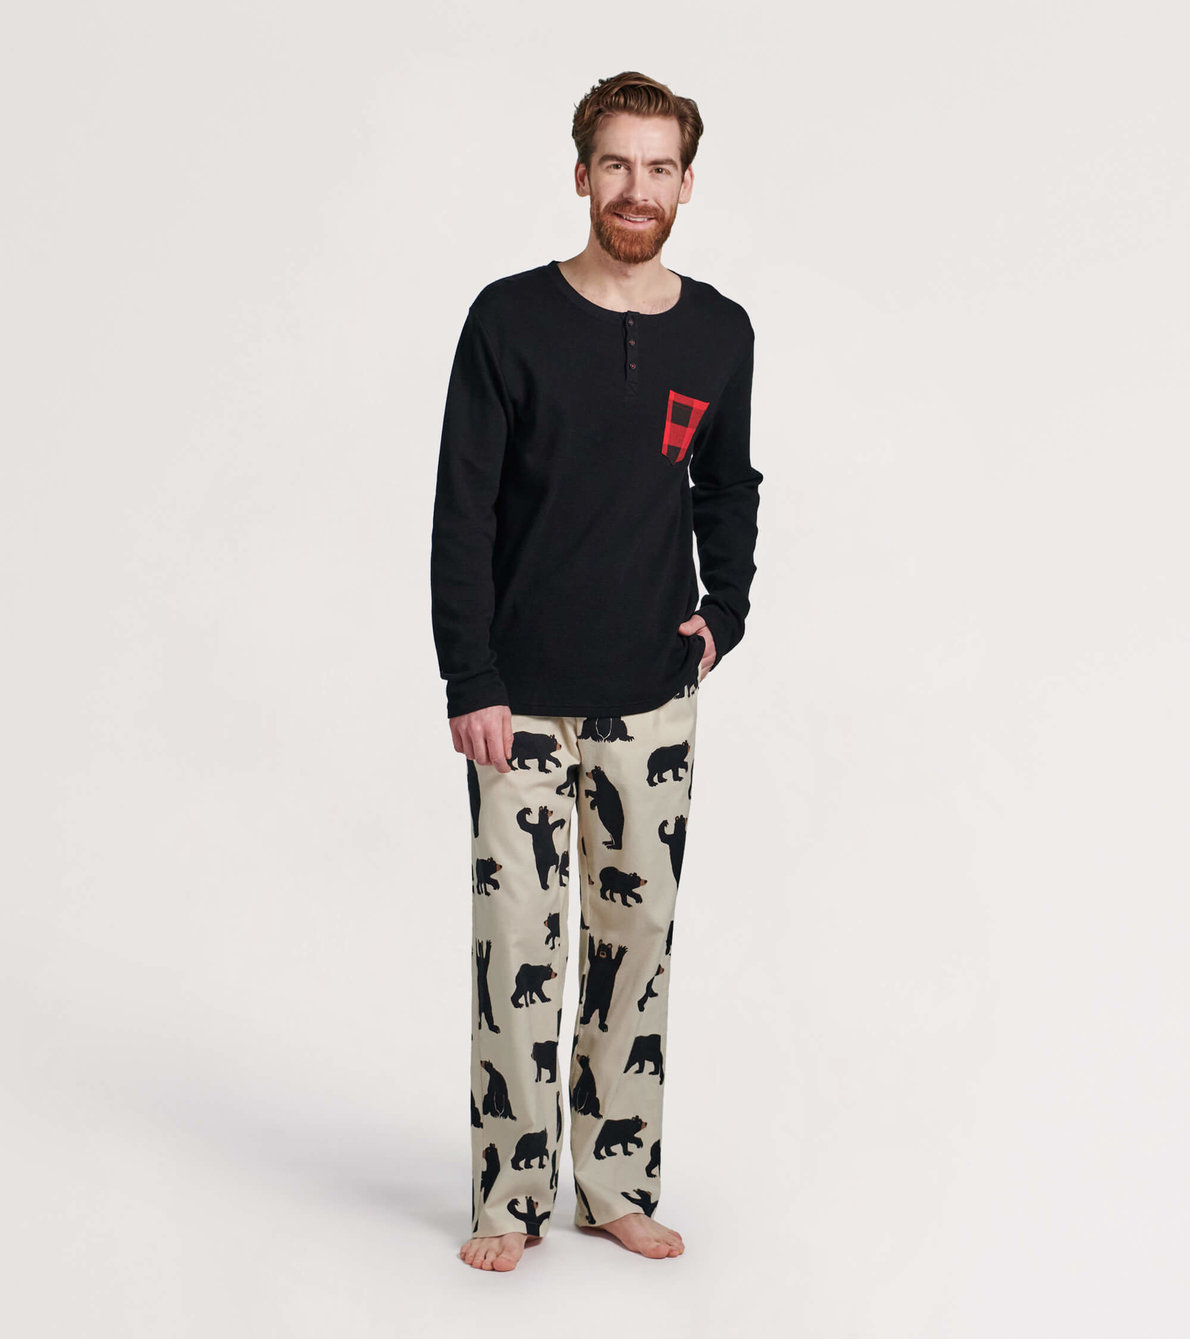 View larger image of Black Bears Men's Henley and Pants Pajama Separates